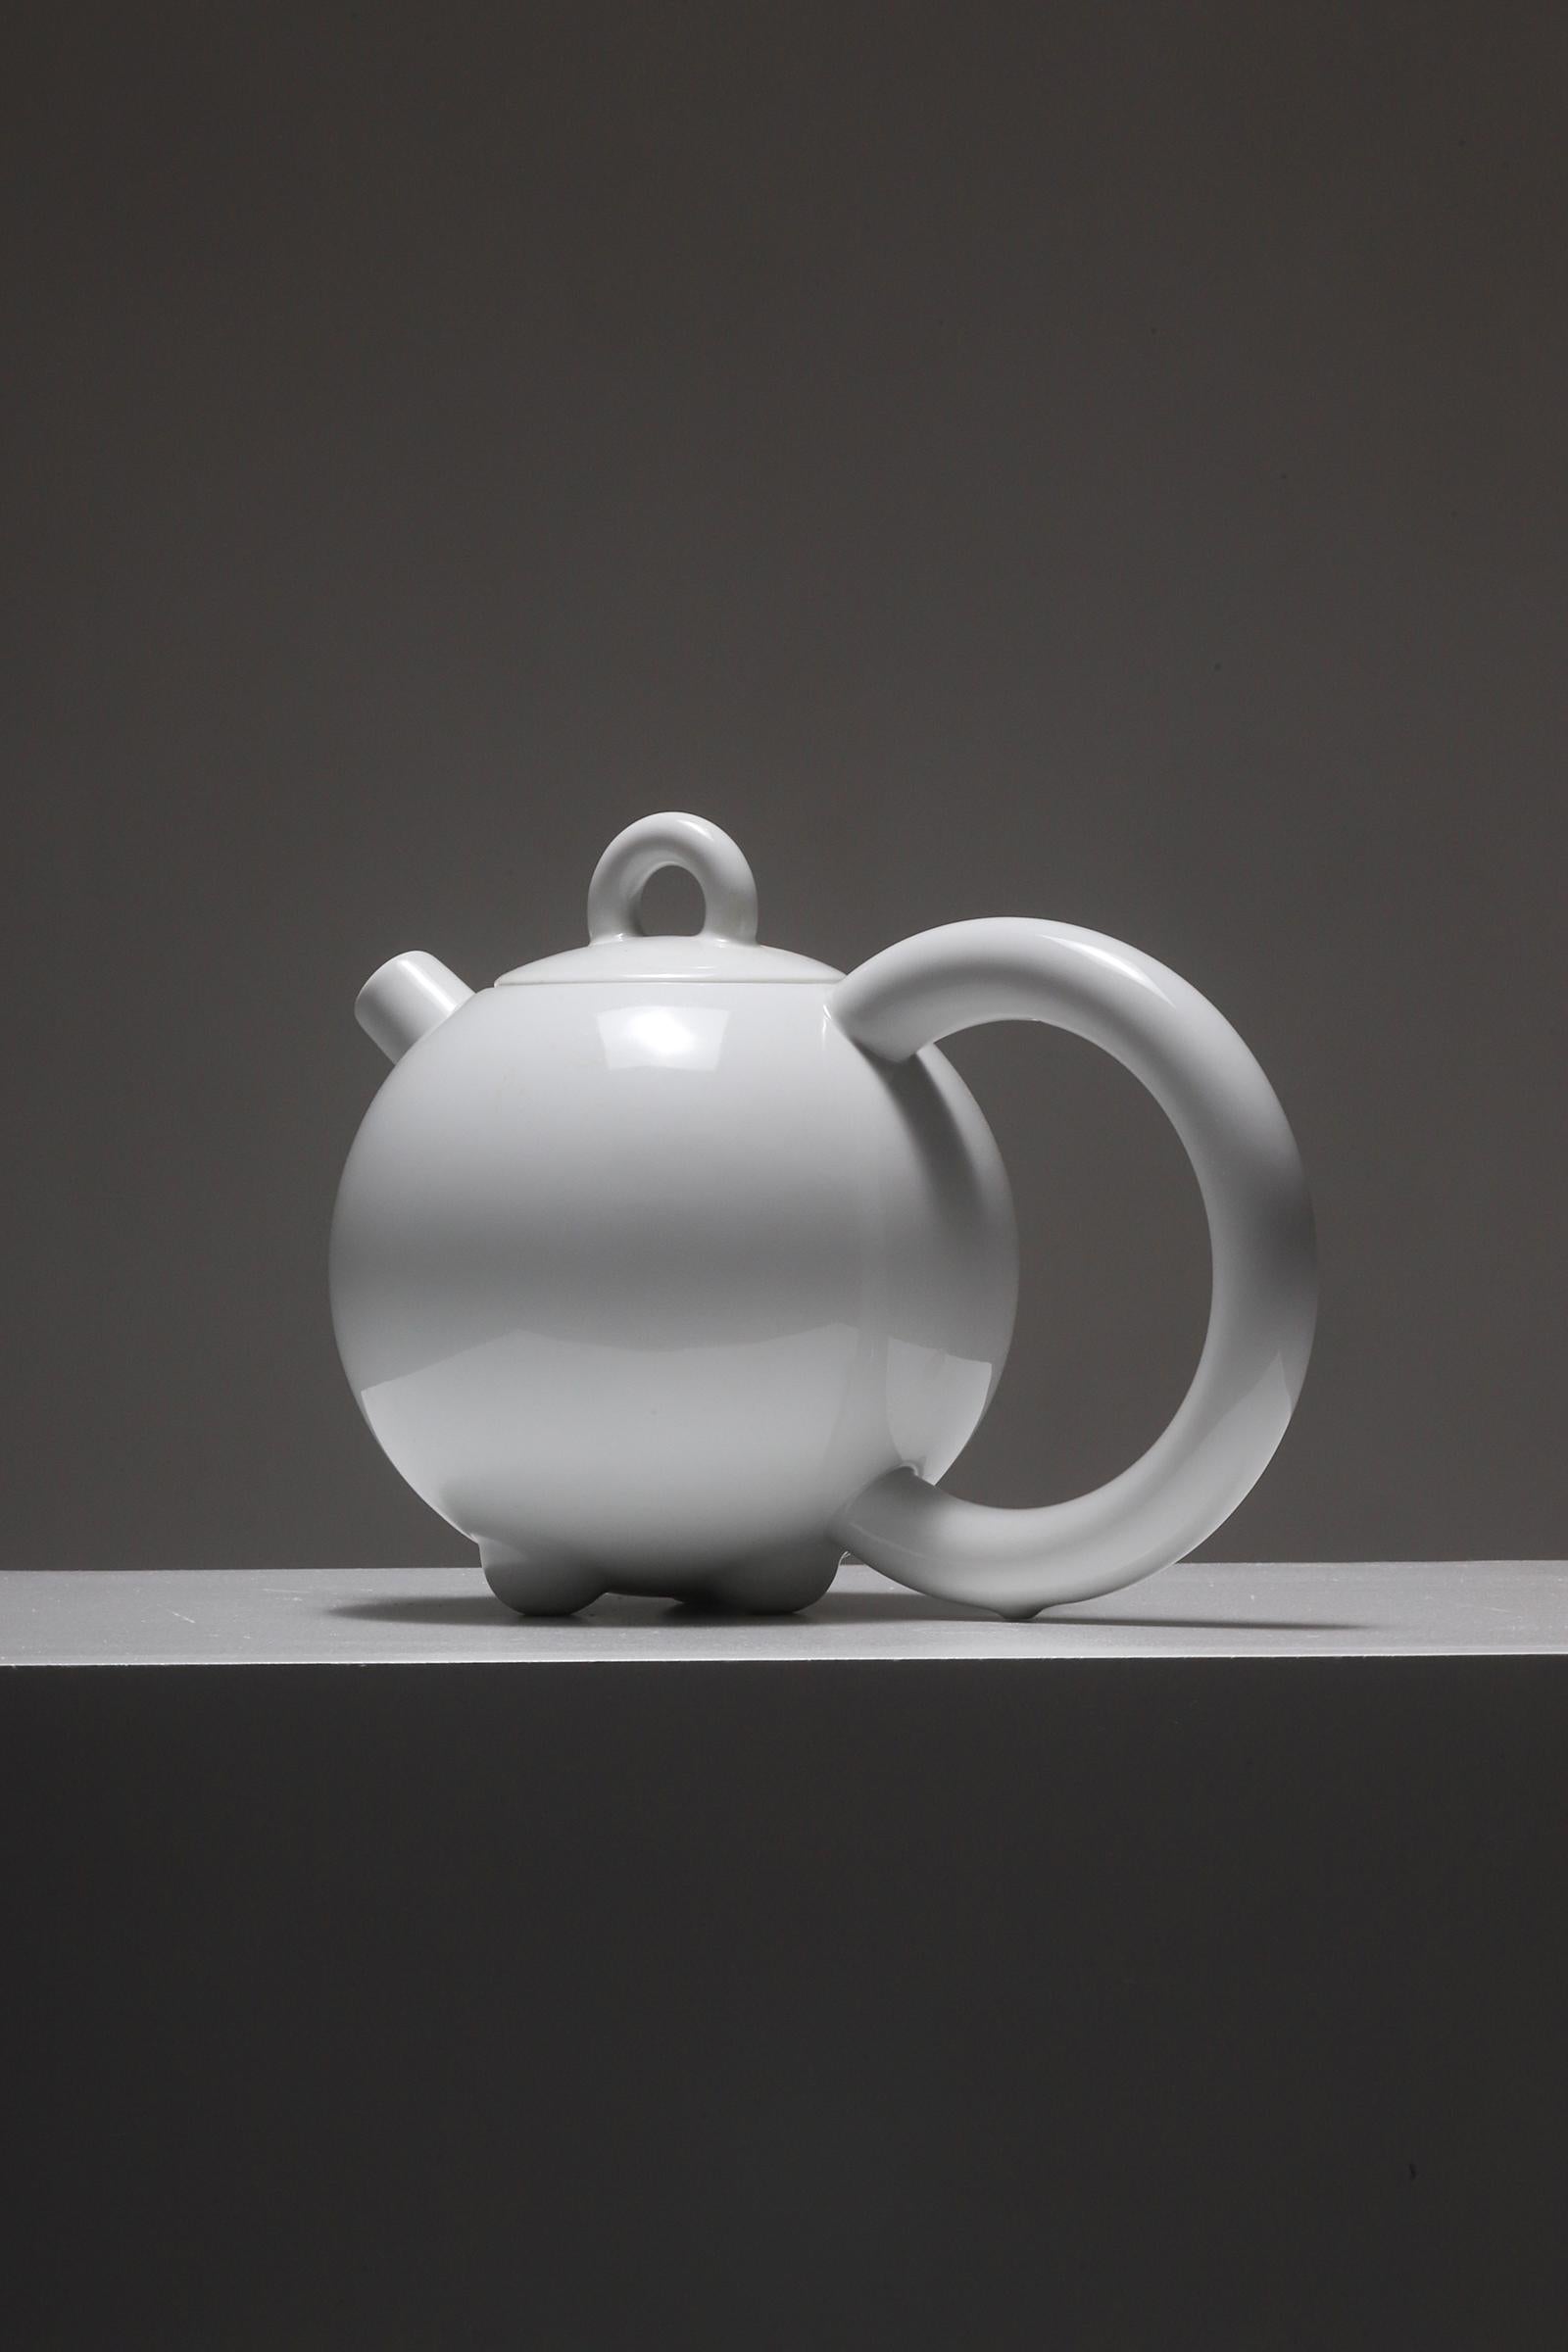 Matteo Thun was one of the co-founders of the Memphis group in 1981. He worked together with many different companies such as Bieffeplast, Swatch and Tiffany. This porcelain coffee / tea pot he designed for Arzberg, Germany in the 1980s. Thun